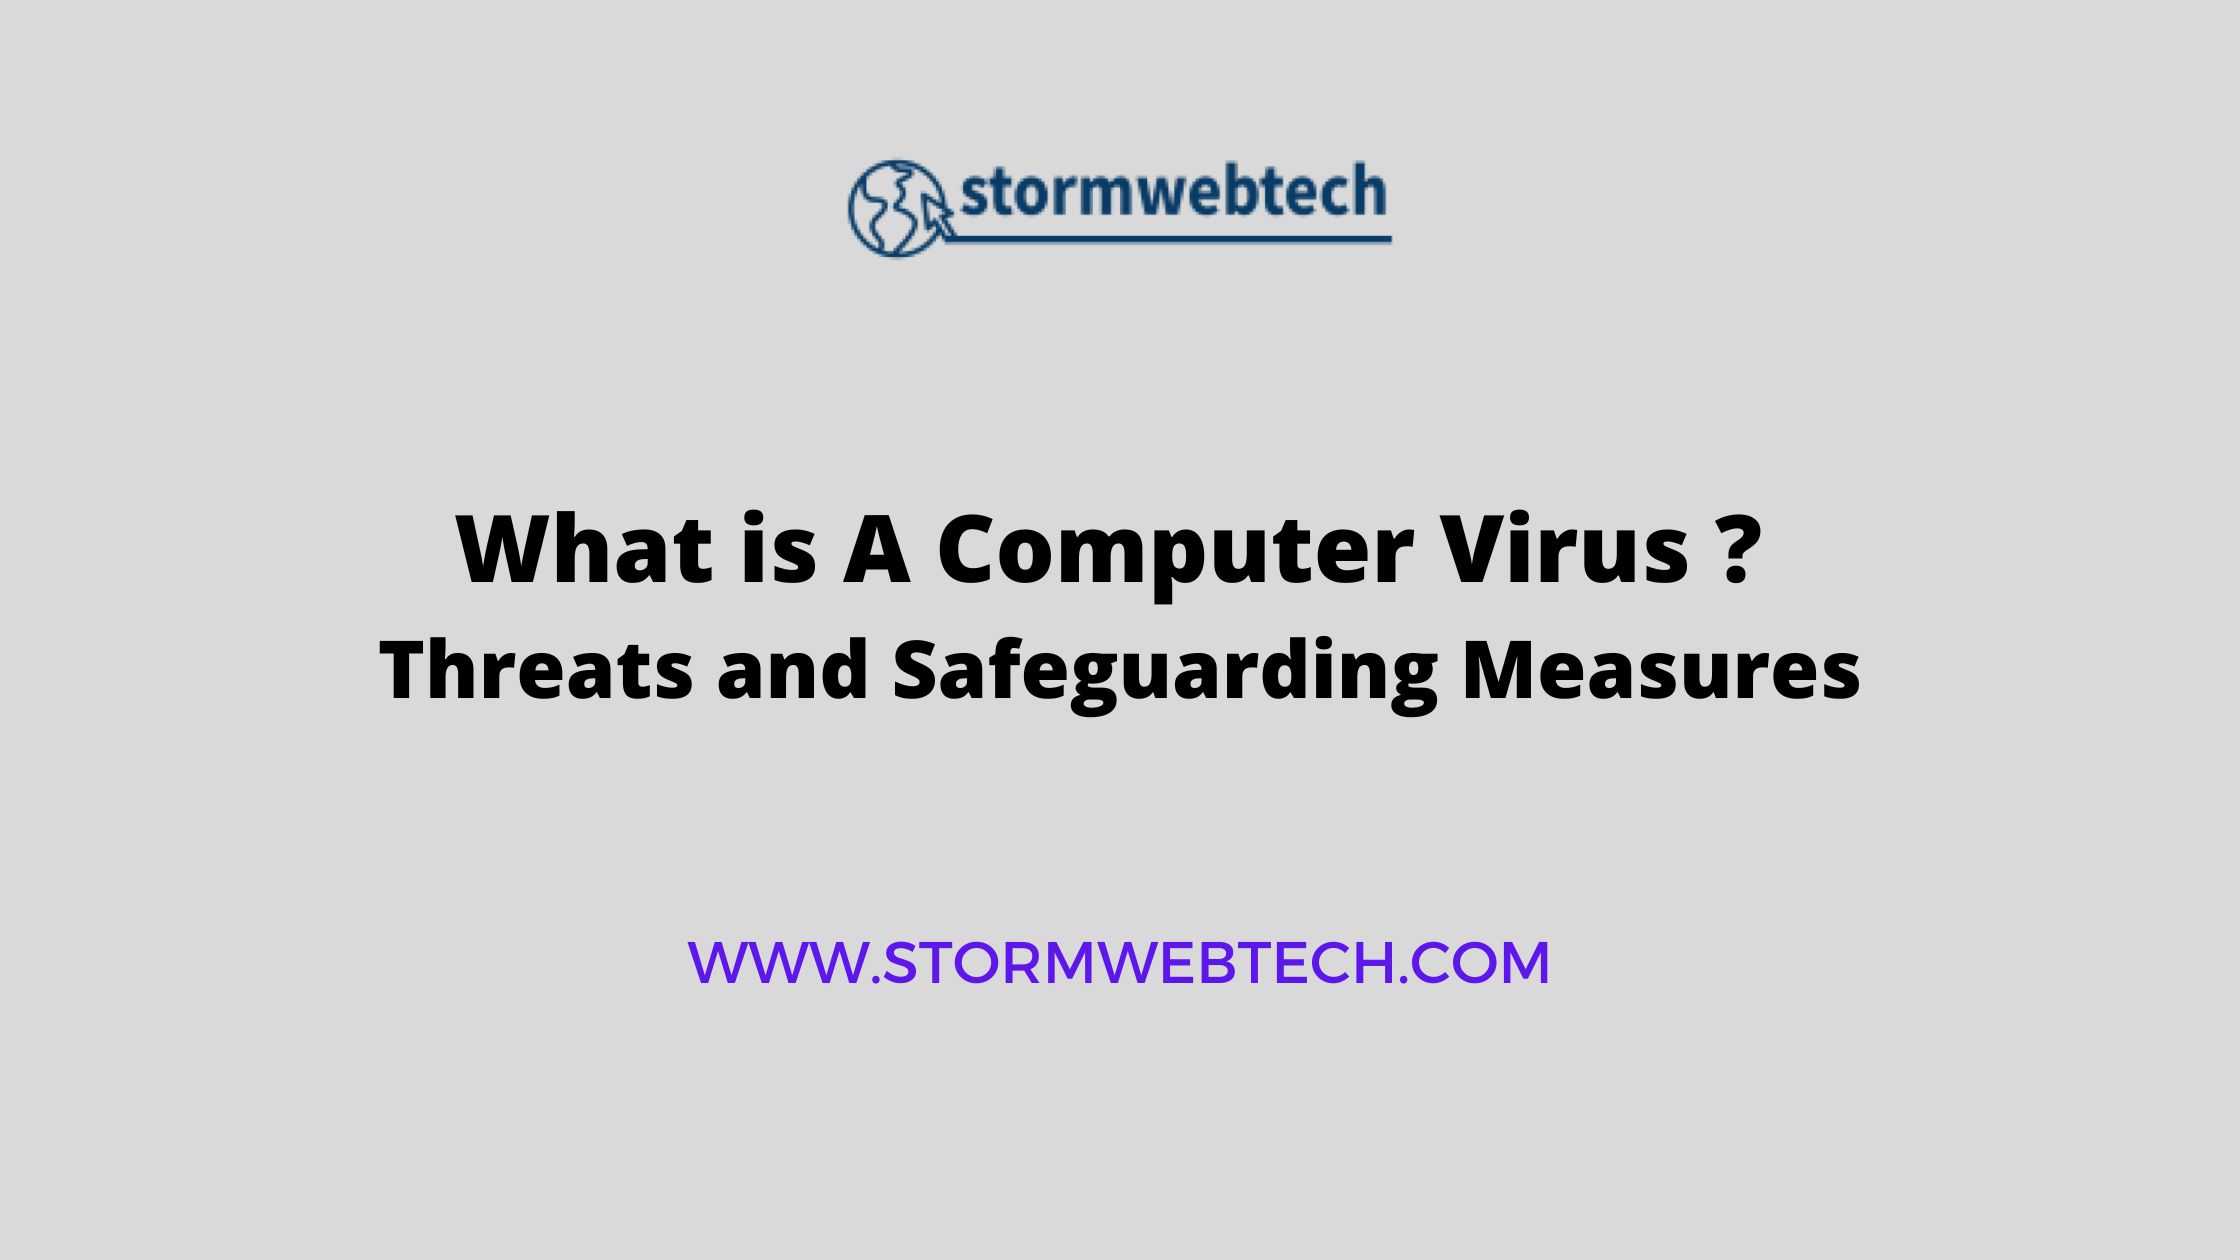 what is a computer virus, types of computer viruses, effects of computer viruses, and essential safeguarding measures to protect your digital life